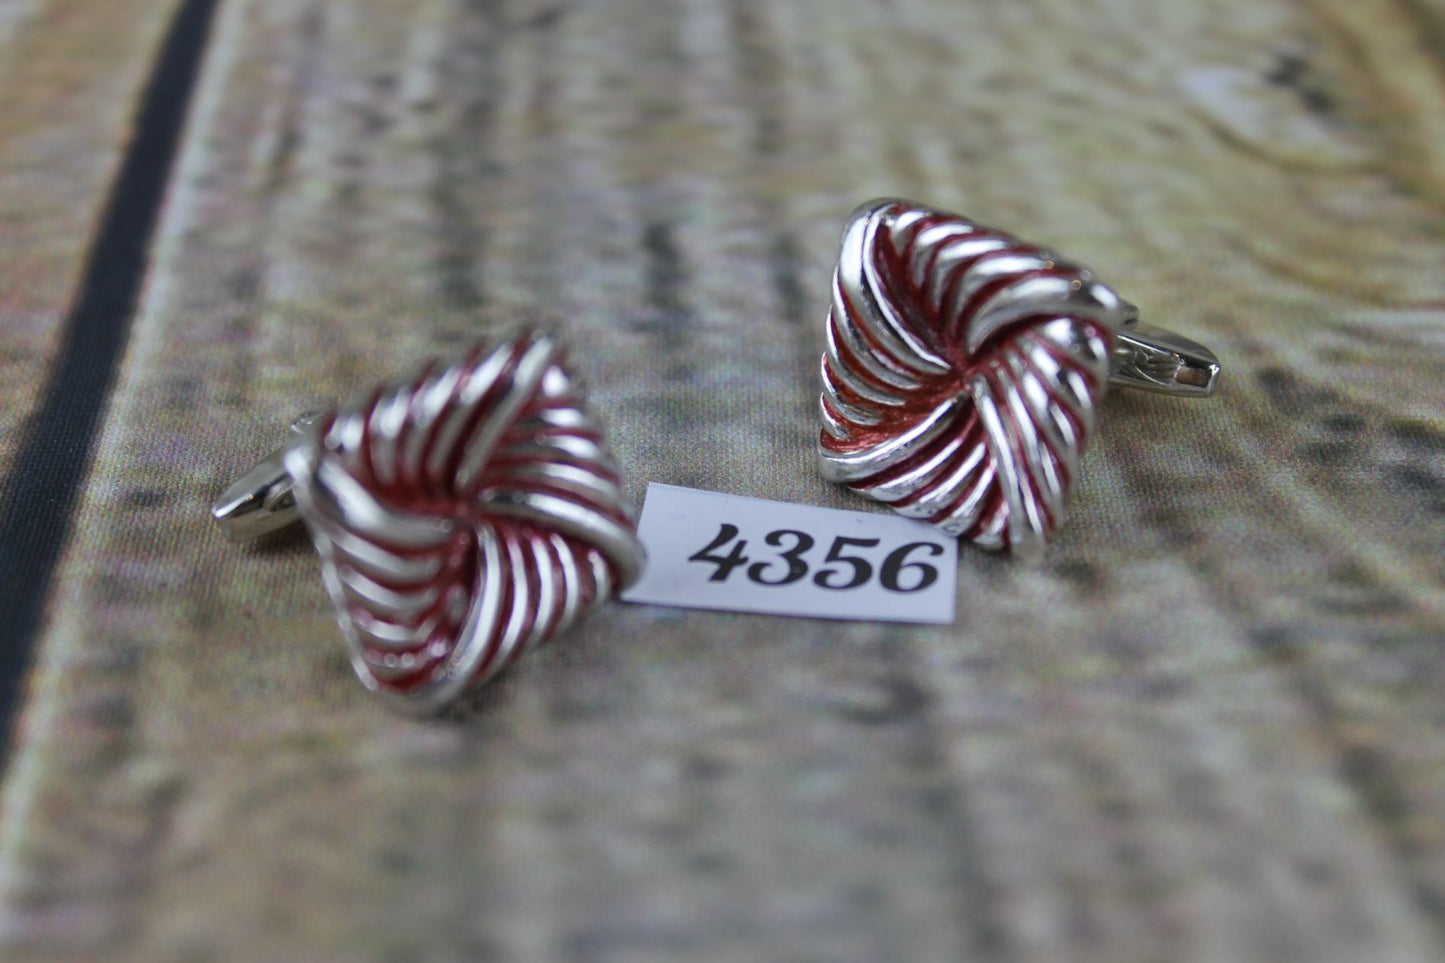 Vintage large square knot silver metal red enamel highlights cuff links